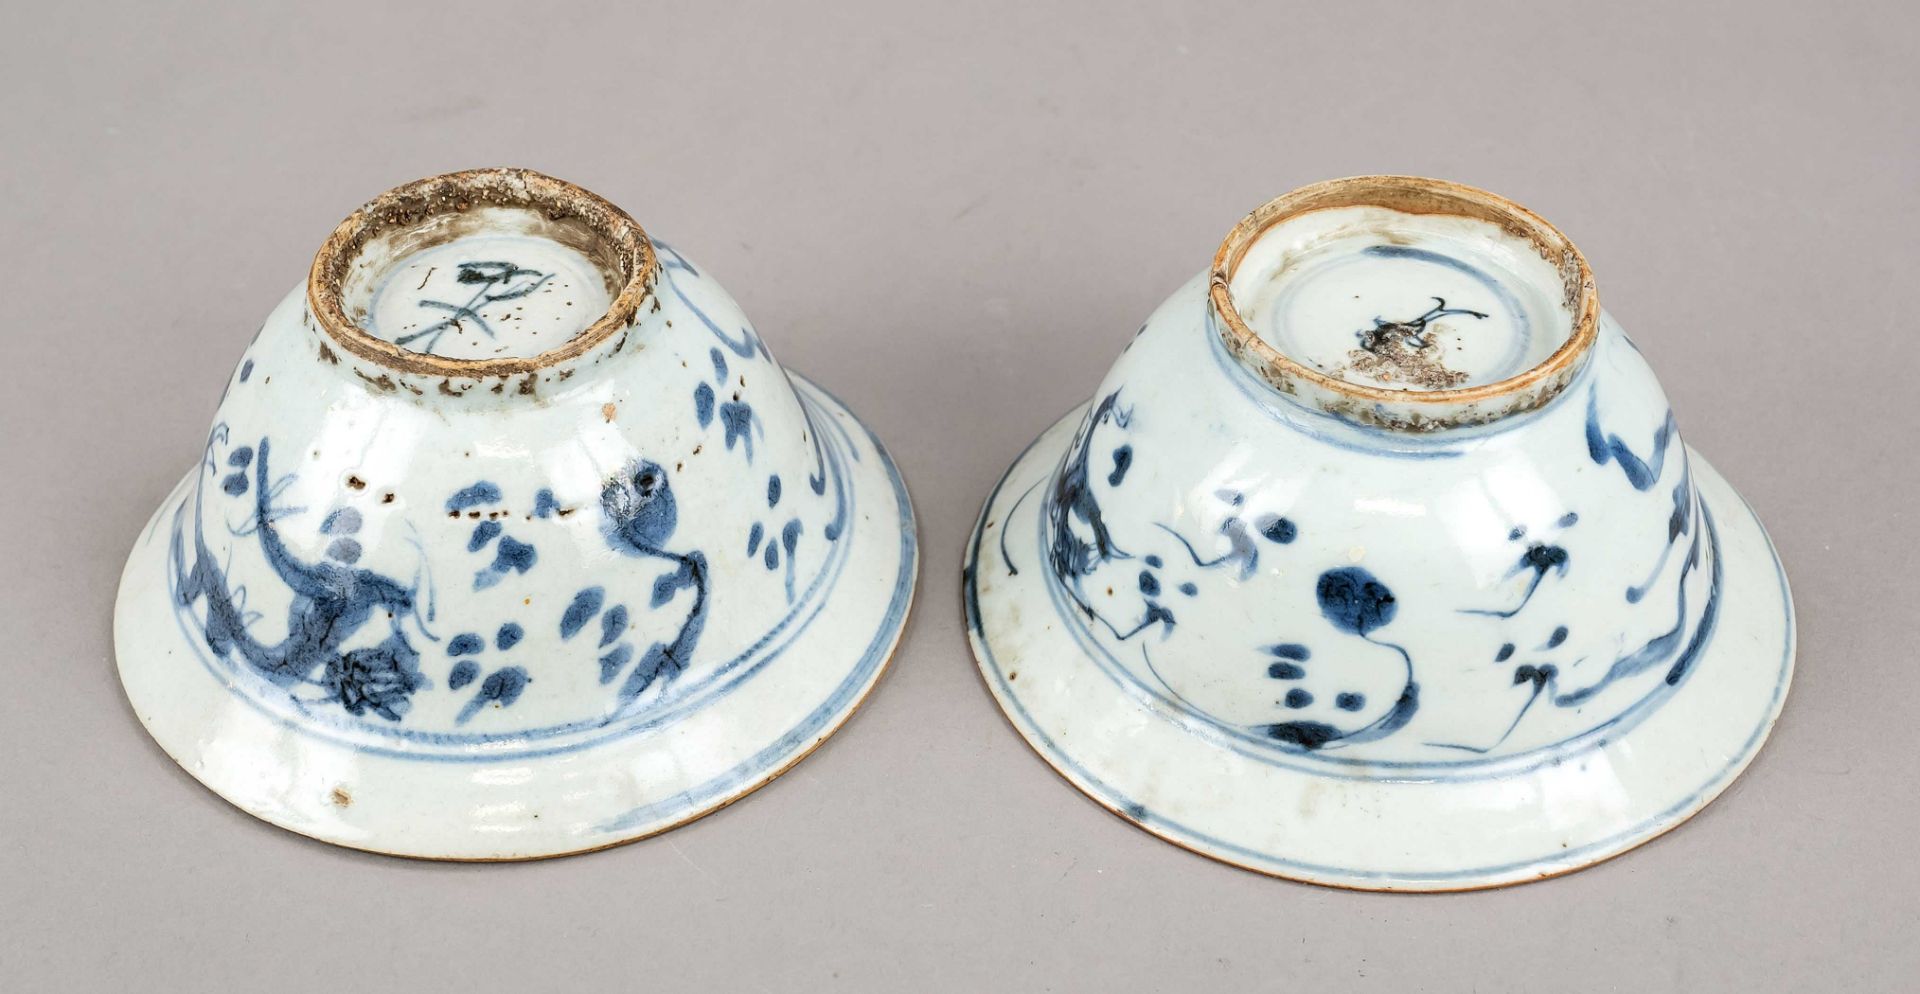 Pair of blue and white bowls, China, Qing dynasty(1644-1912), 18th-19th century, grayish porcelain - Image 2 of 2